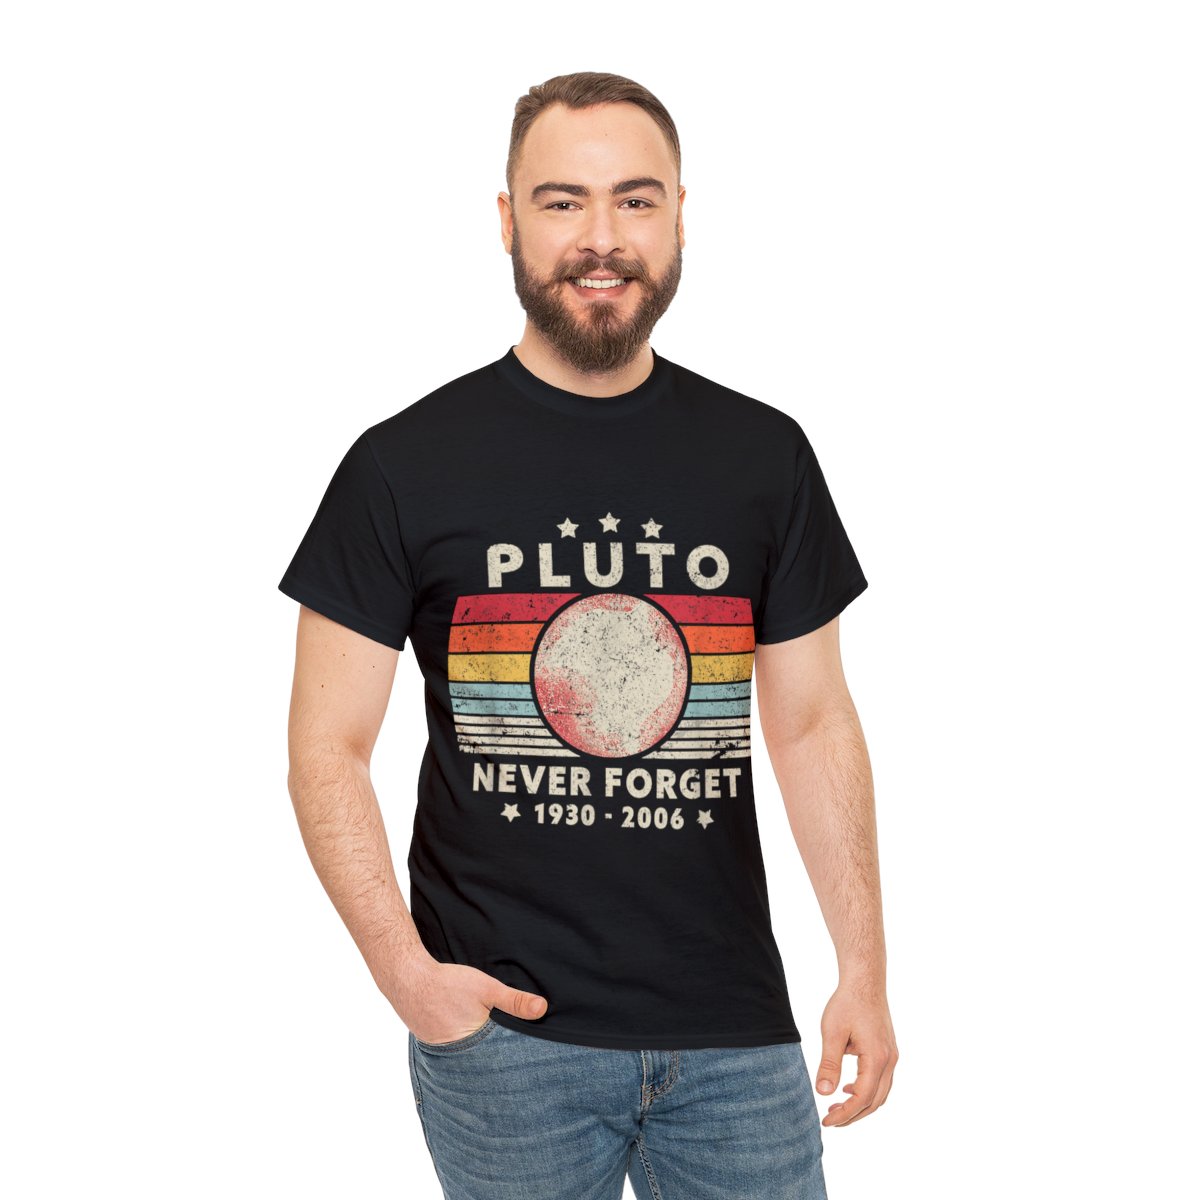 Never Forget Pluto Shirt, Retro Style Funny Space, Science T-Shirt